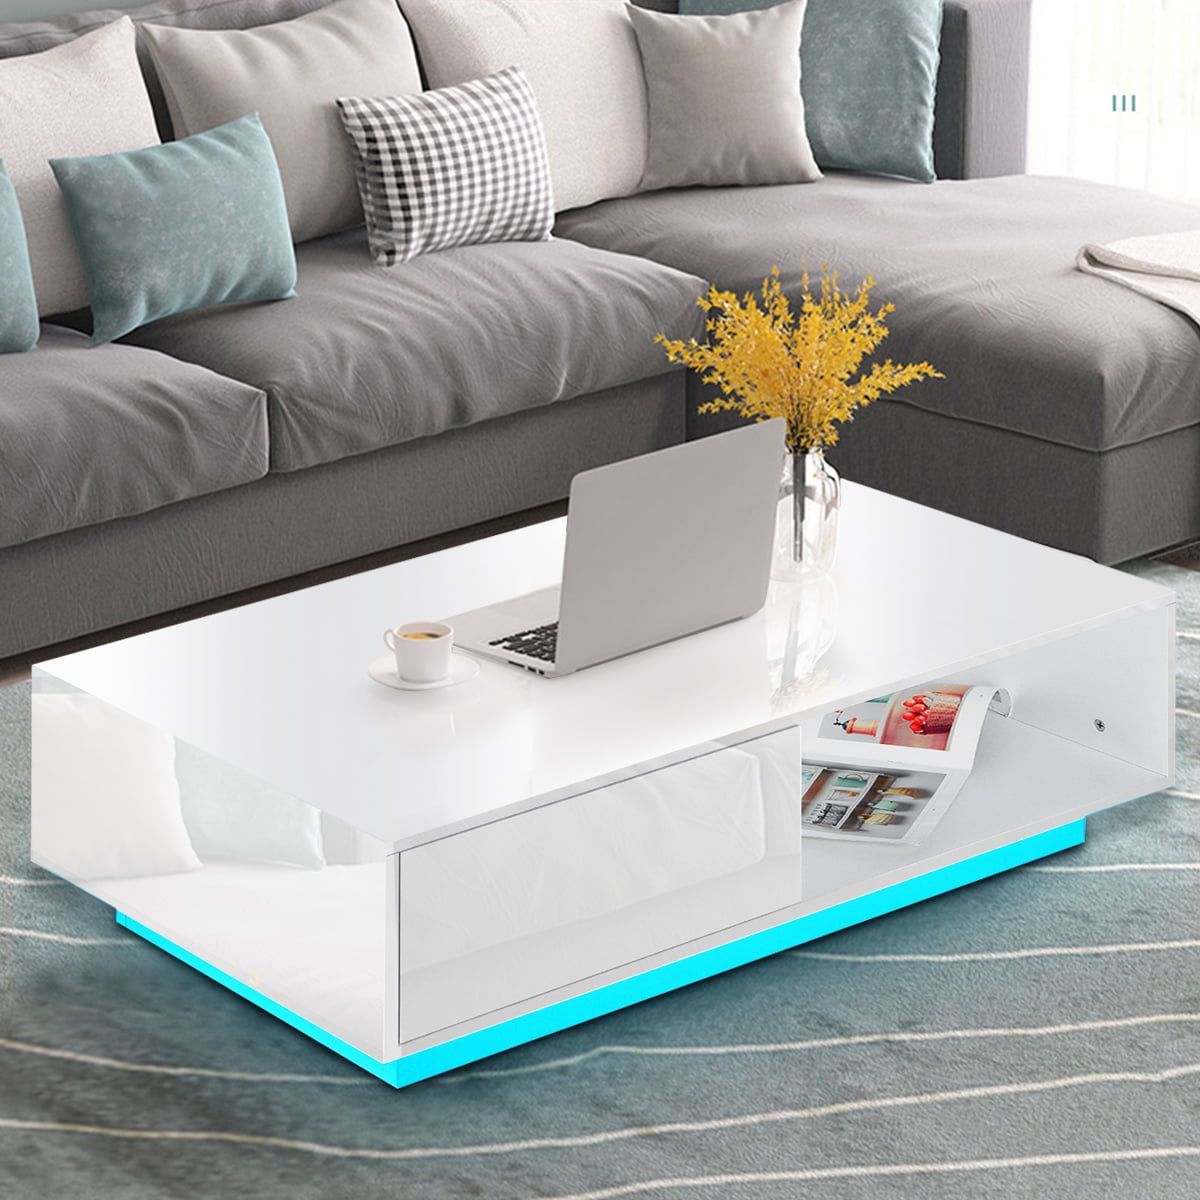 High Gloss Rgb Led Coffee Table With 2 Drawer Storage Modern Sofa Side Intended For Rectangular Led Coffee Tables (View 10 of 15)